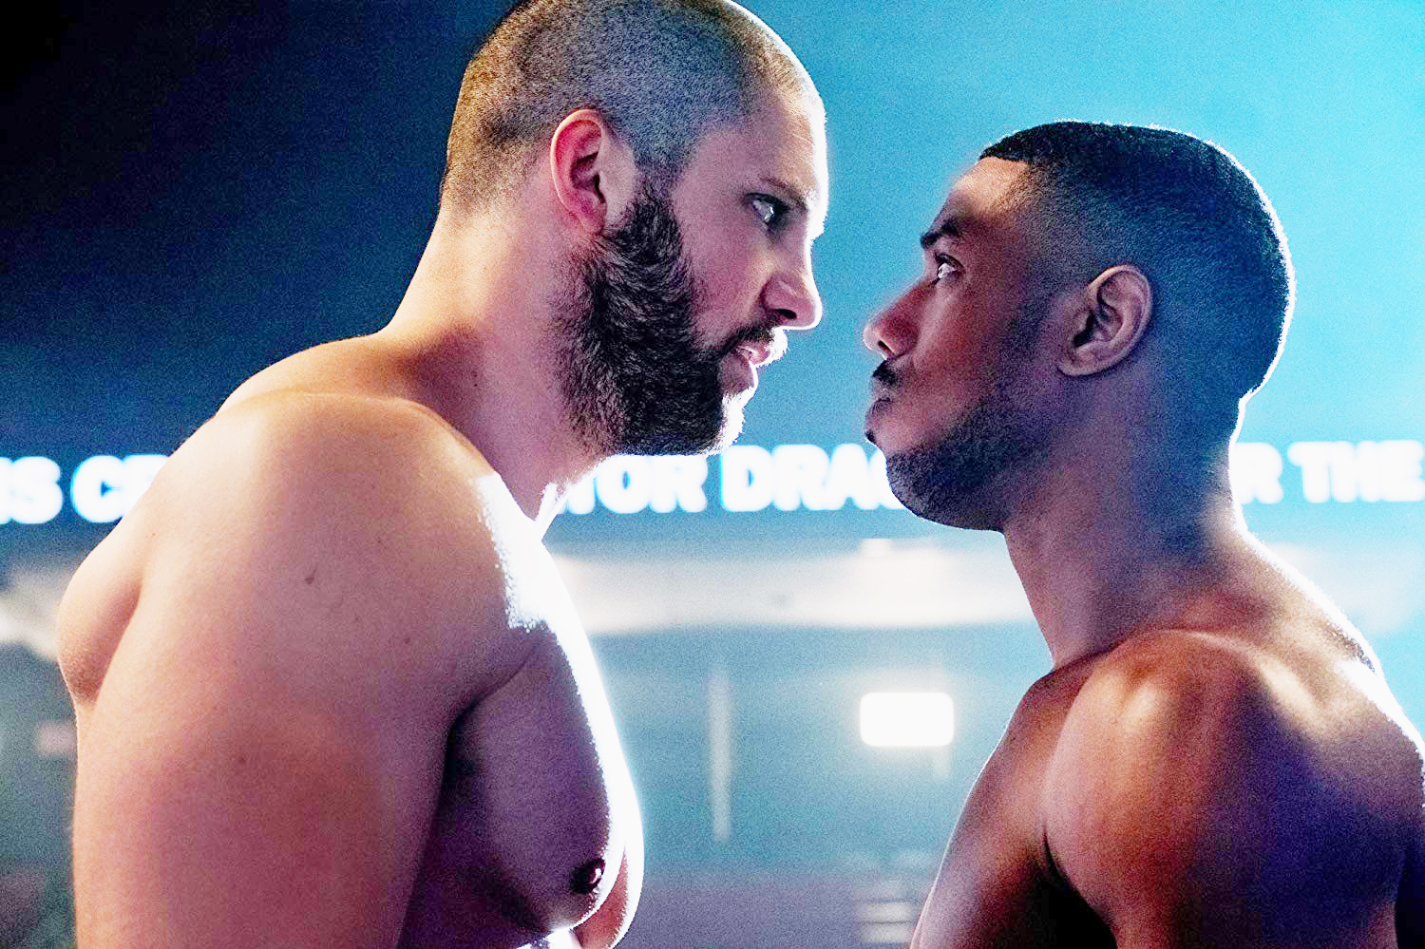 Michael B. Jordan returns as Adonis Creed for the seventh film in the Rocky franchise. He faces Victor Drago (Florian Munteanu) son of Ivan Drago (Dolph Lundgren) who killed Creed’s father before he was born.